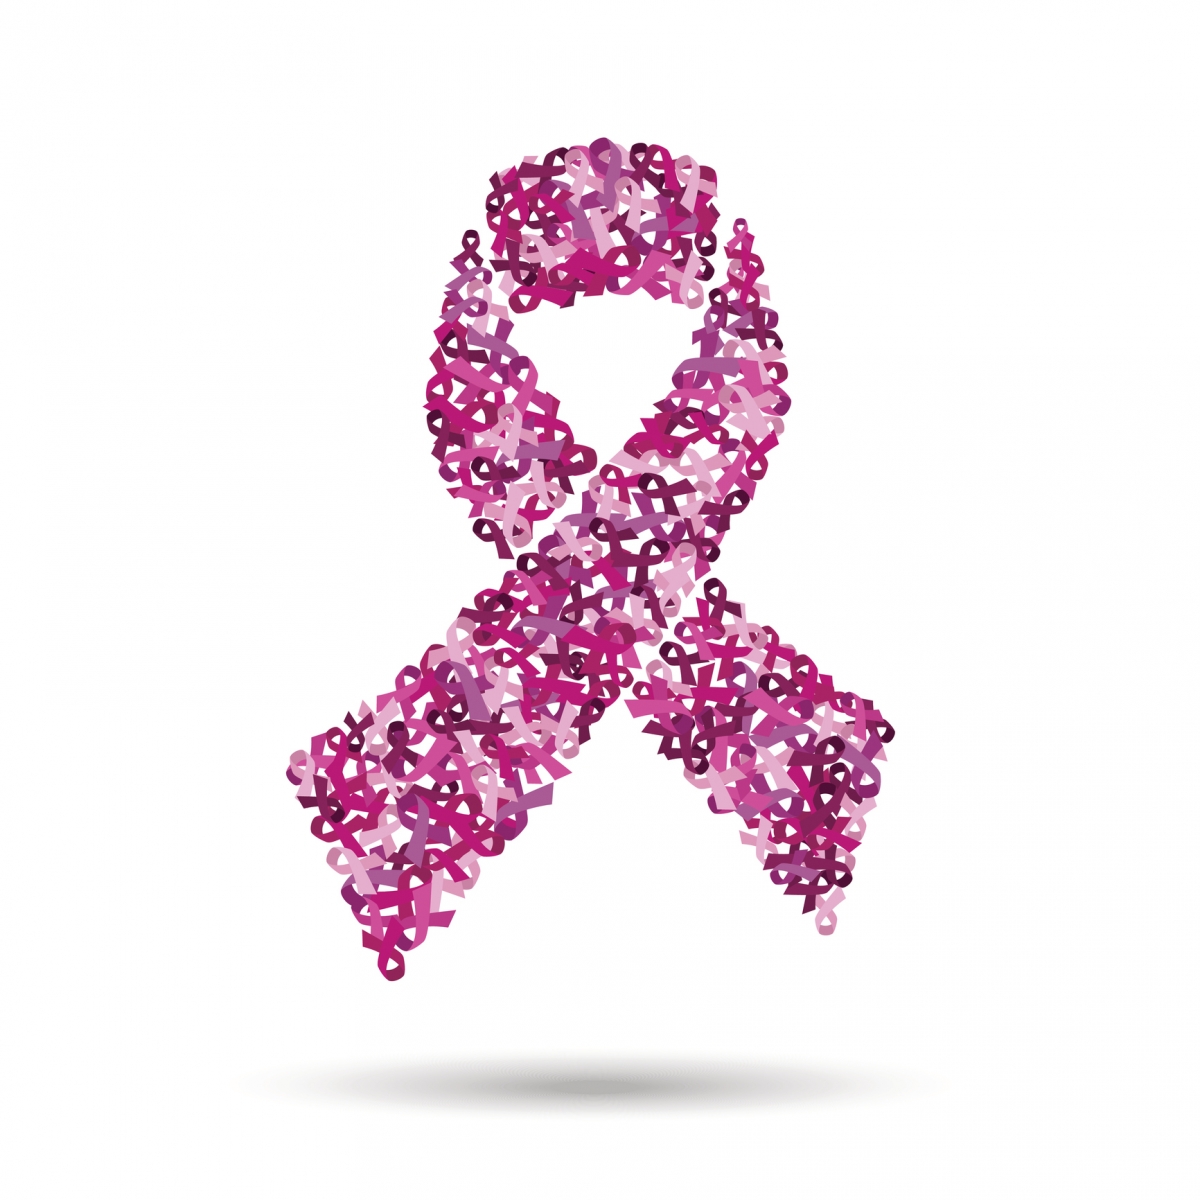 _Triple breast cancer